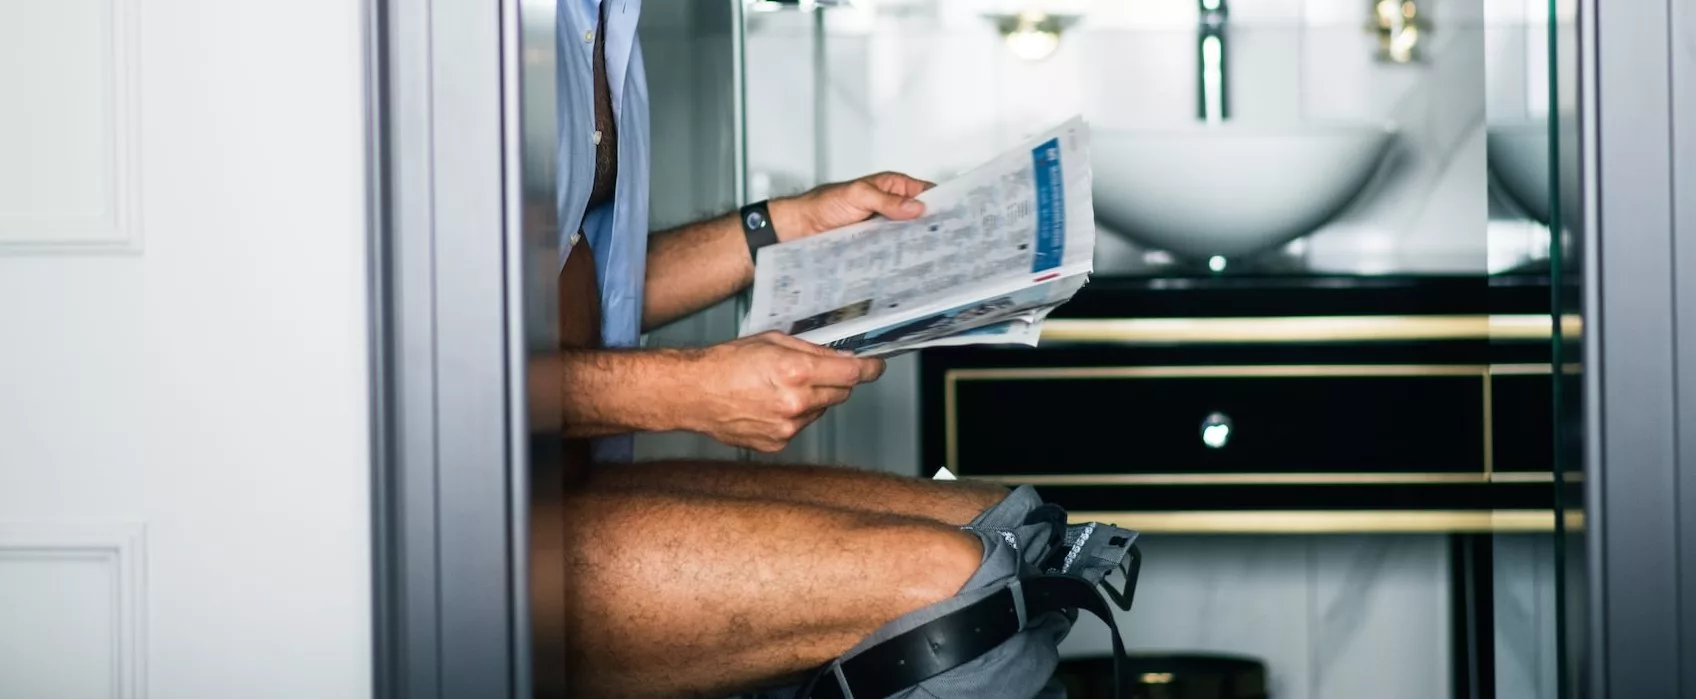 a man sitting on the toilet reading a newspaper